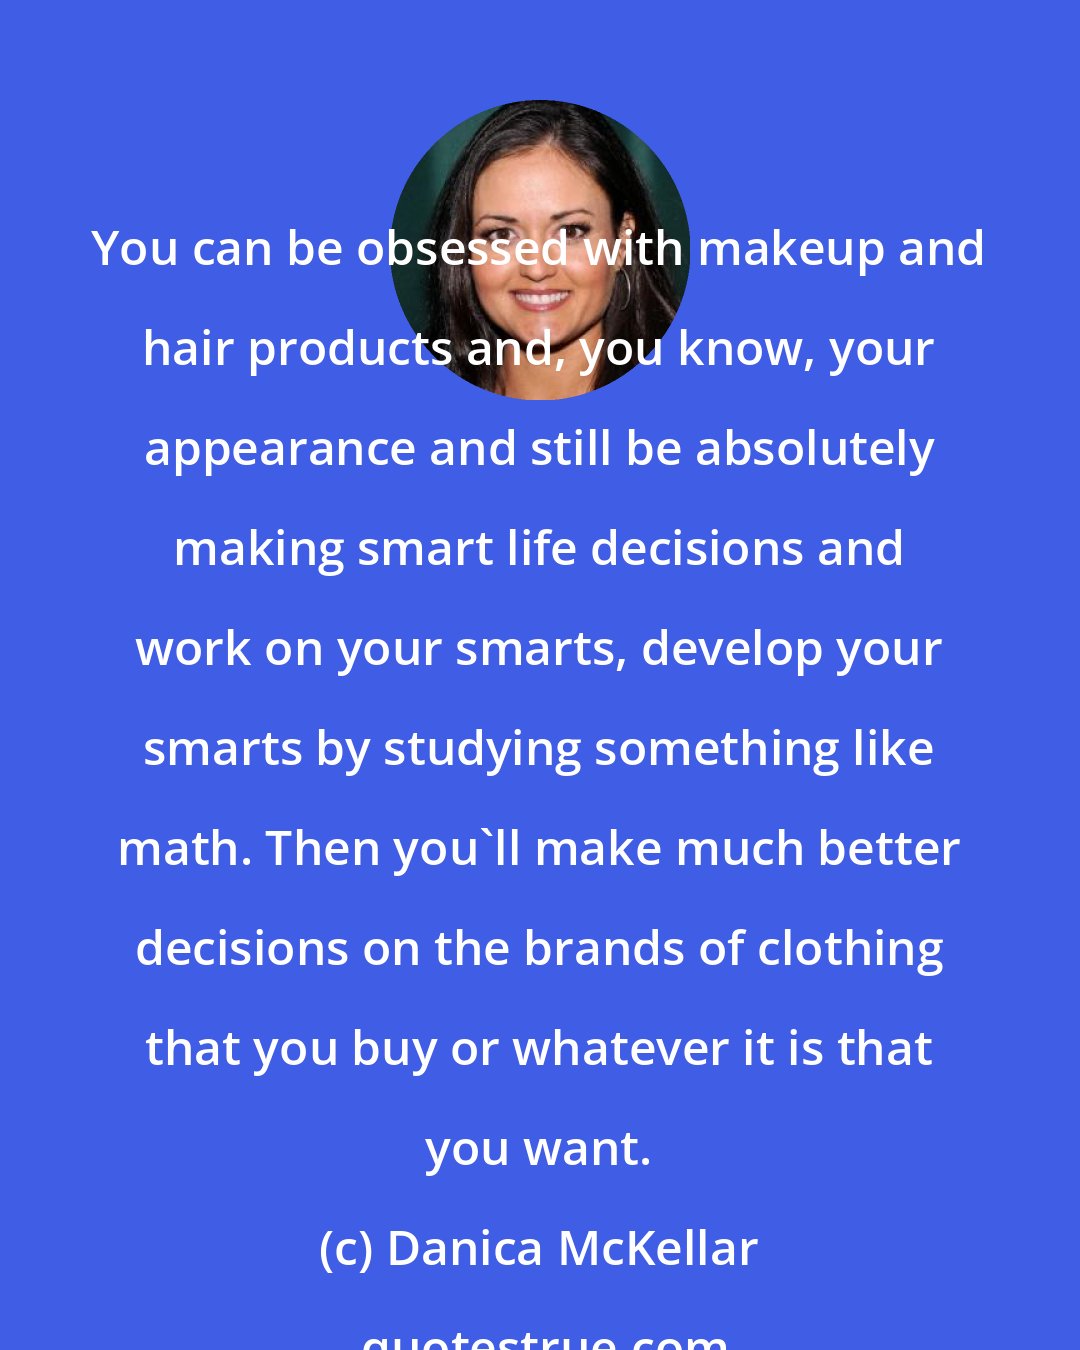 Danica McKellar: You can be obsessed with makeup and hair products and, you know, your appearance and still be absolutely making smart life decisions and work on your smarts, develop your smarts by studying something like math. Then you'll make much better decisions on the brands of clothing that you buy or whatever it is that you want.